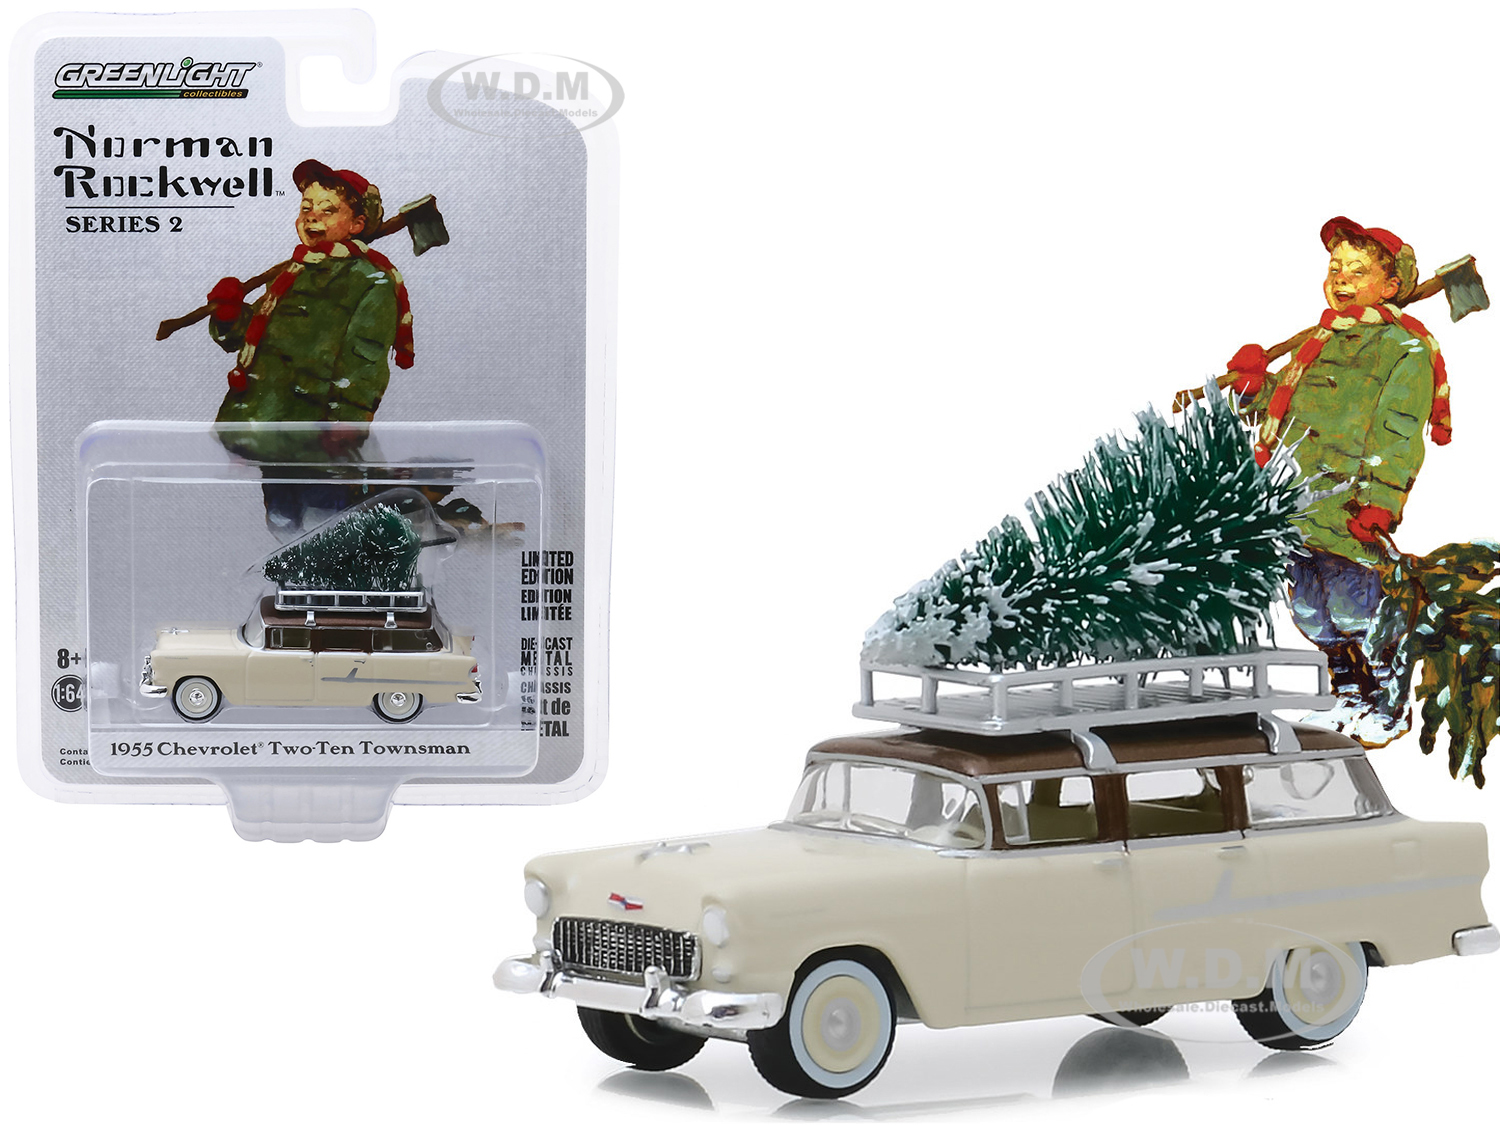 1955 Chevrolet Two-ten Townsman Cream With Brown Top With Roof Rack And Christmas Tree Accessory "norman Rockwell" Series 2 1/64 Diecast Model Car By